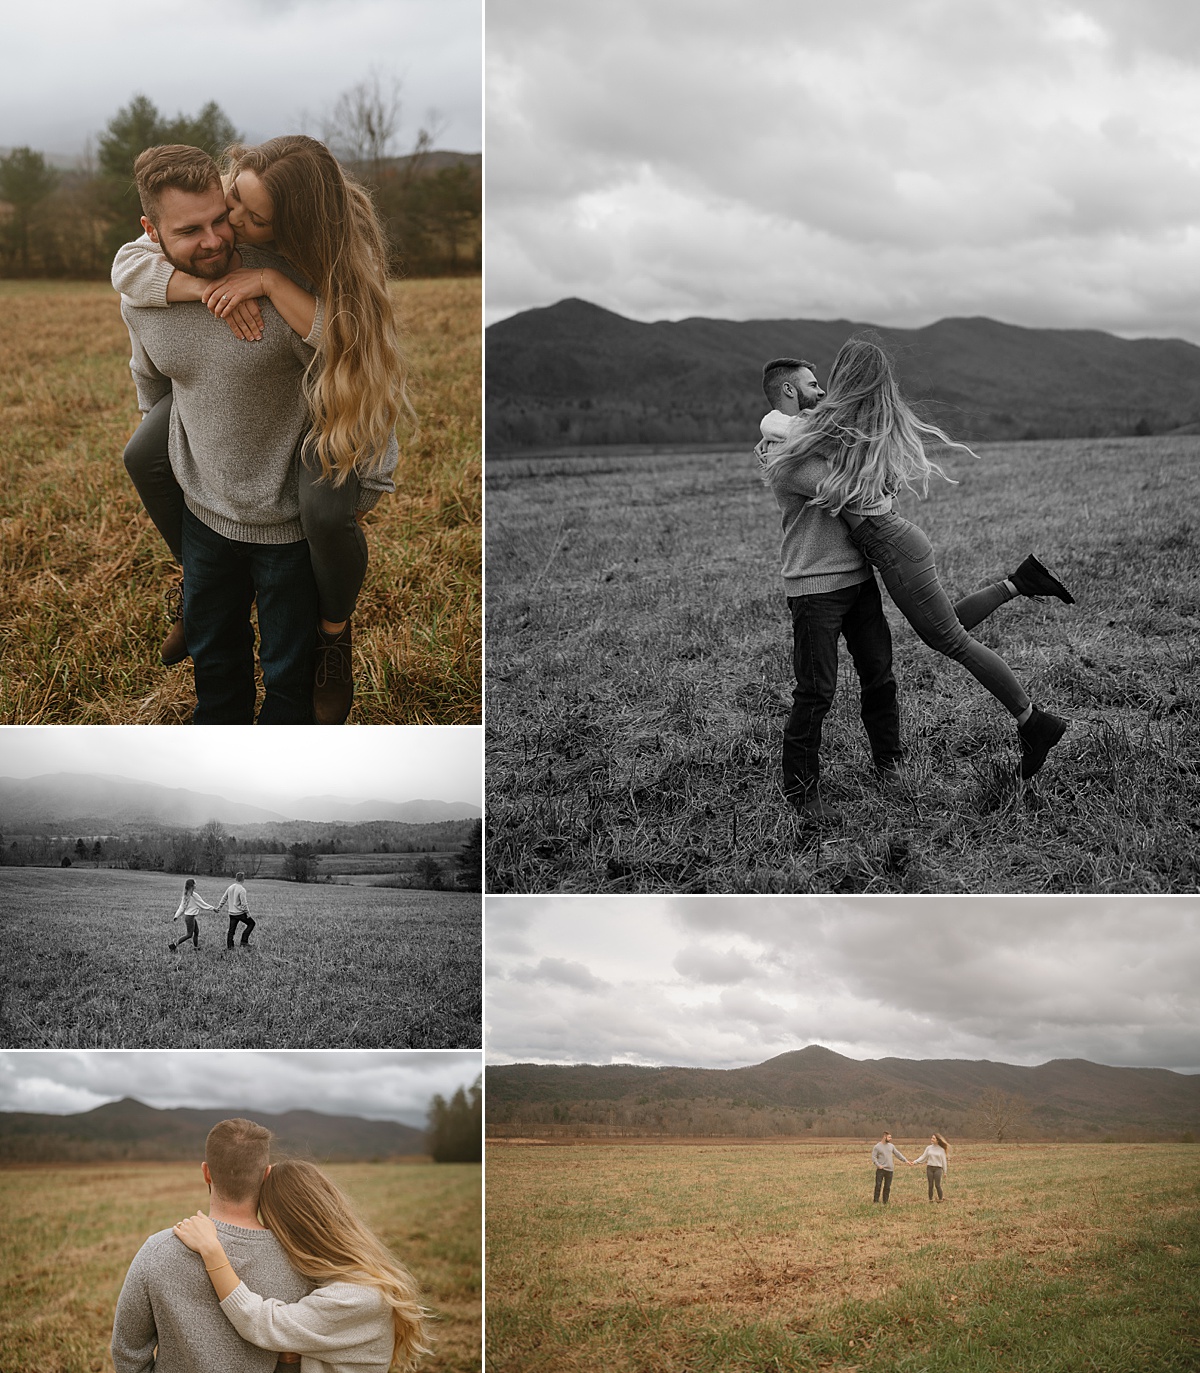 Romantic engagement photos at Cade's Cove in Smoky Mountains National Park at sunrise.